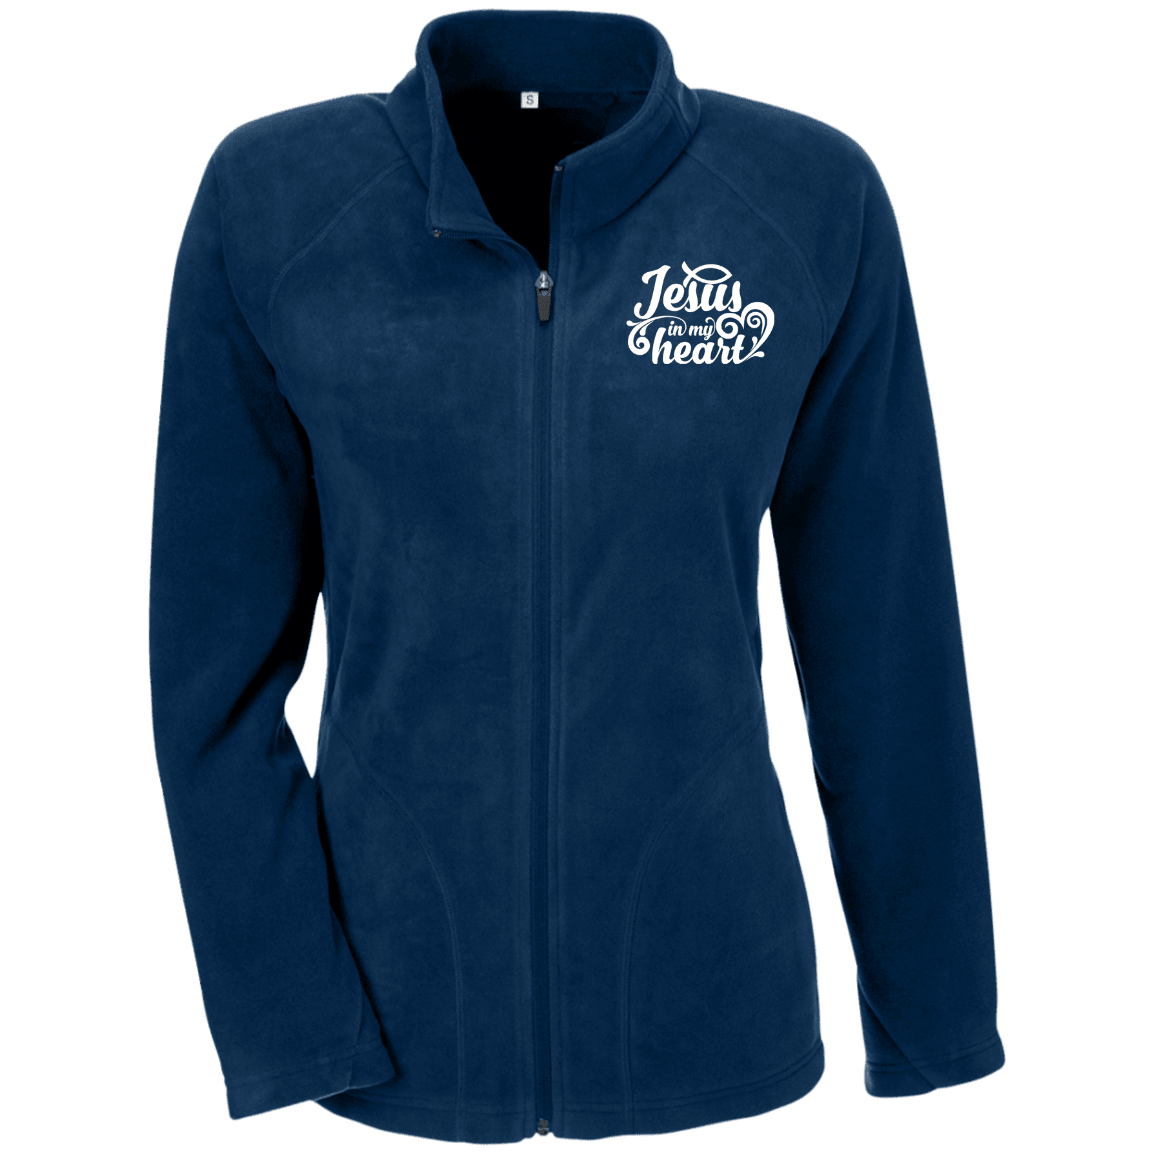 Designs by MyUtopia Shout Out:Jesus in My Heart Embroidered Team 365 Ladies' Microfleece Jacket - Navy Blue,Dark Navy / X-Small,Jackets